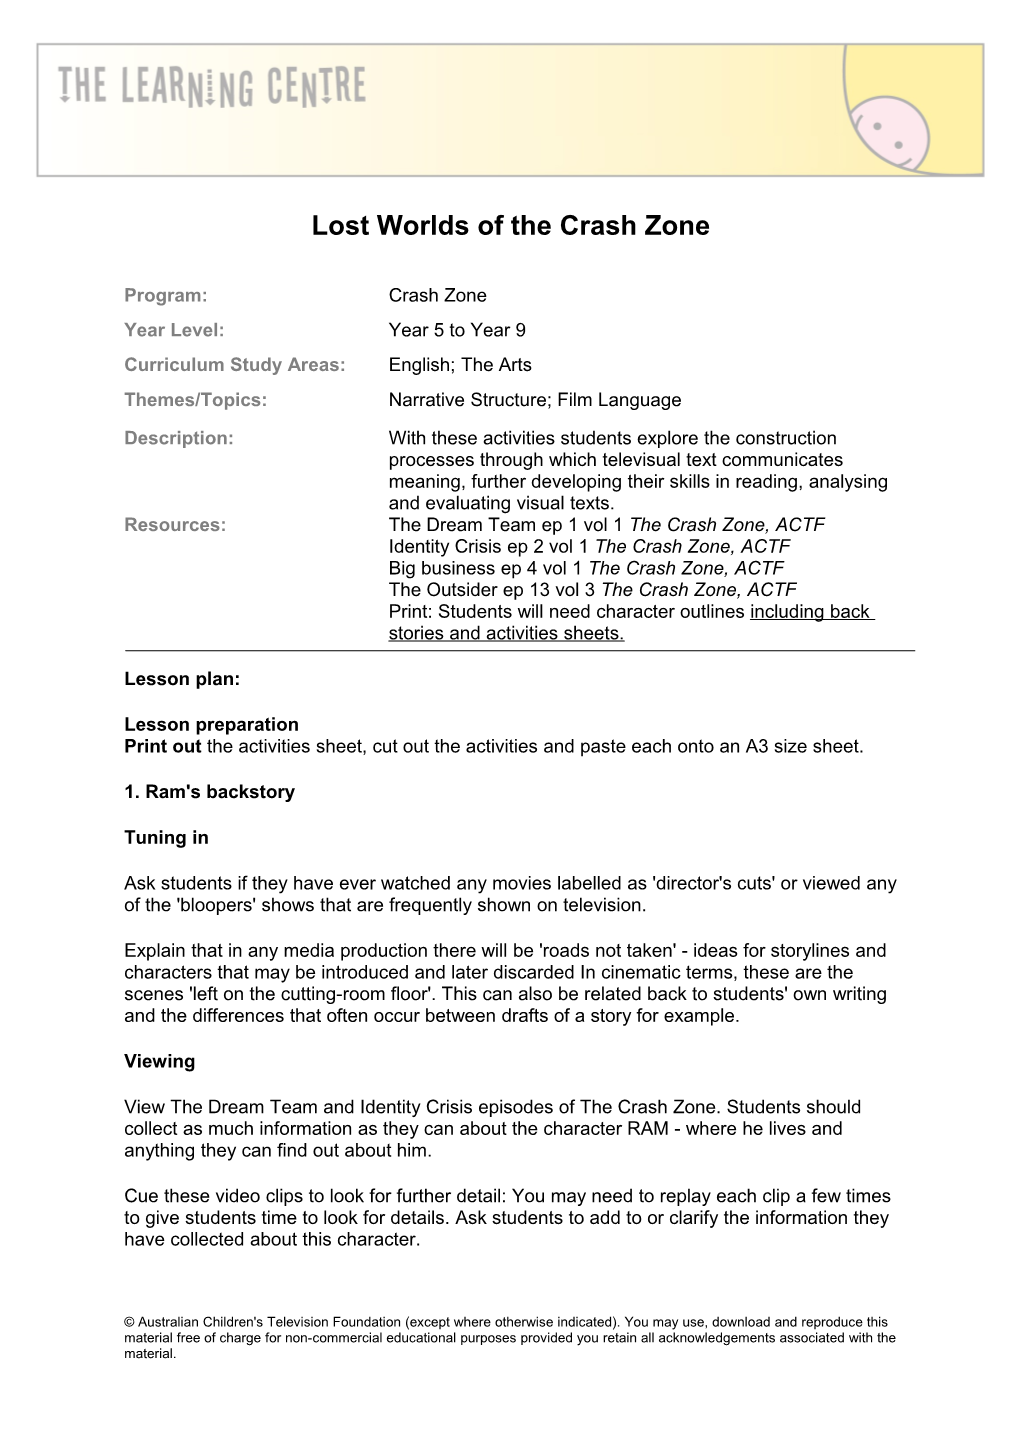 Lost Worlds of the Crash Zone